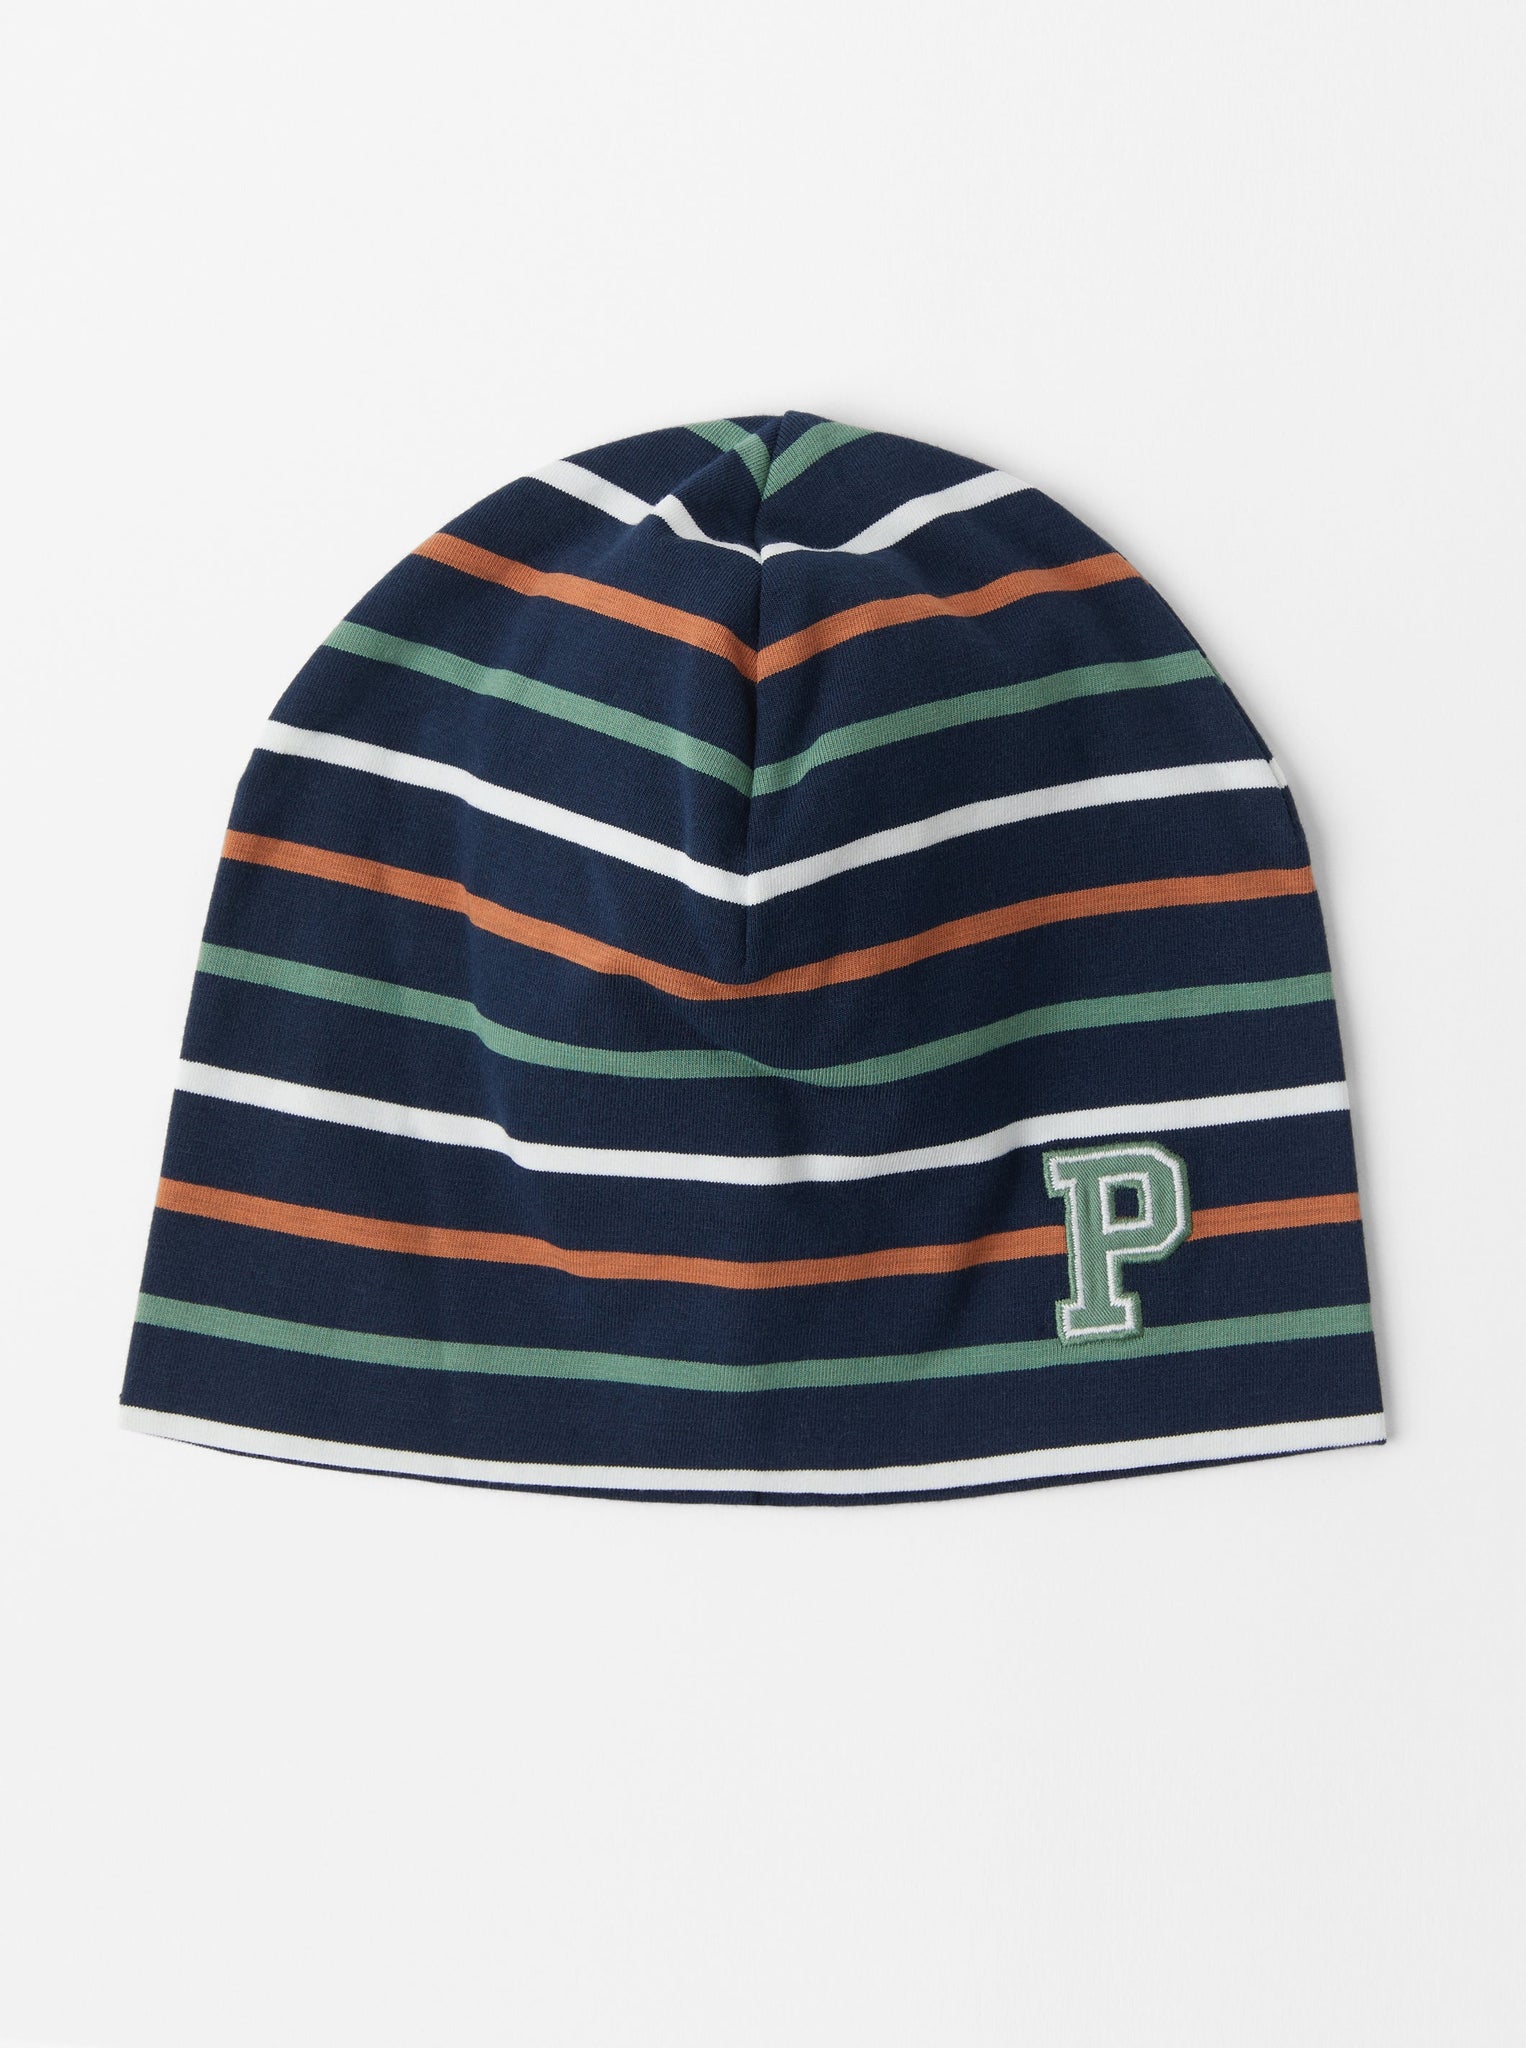 Striped Navy Kids Beanie Hat from the Polarn O. Pyret kidswear collection. Ethically produced kids outerwear.